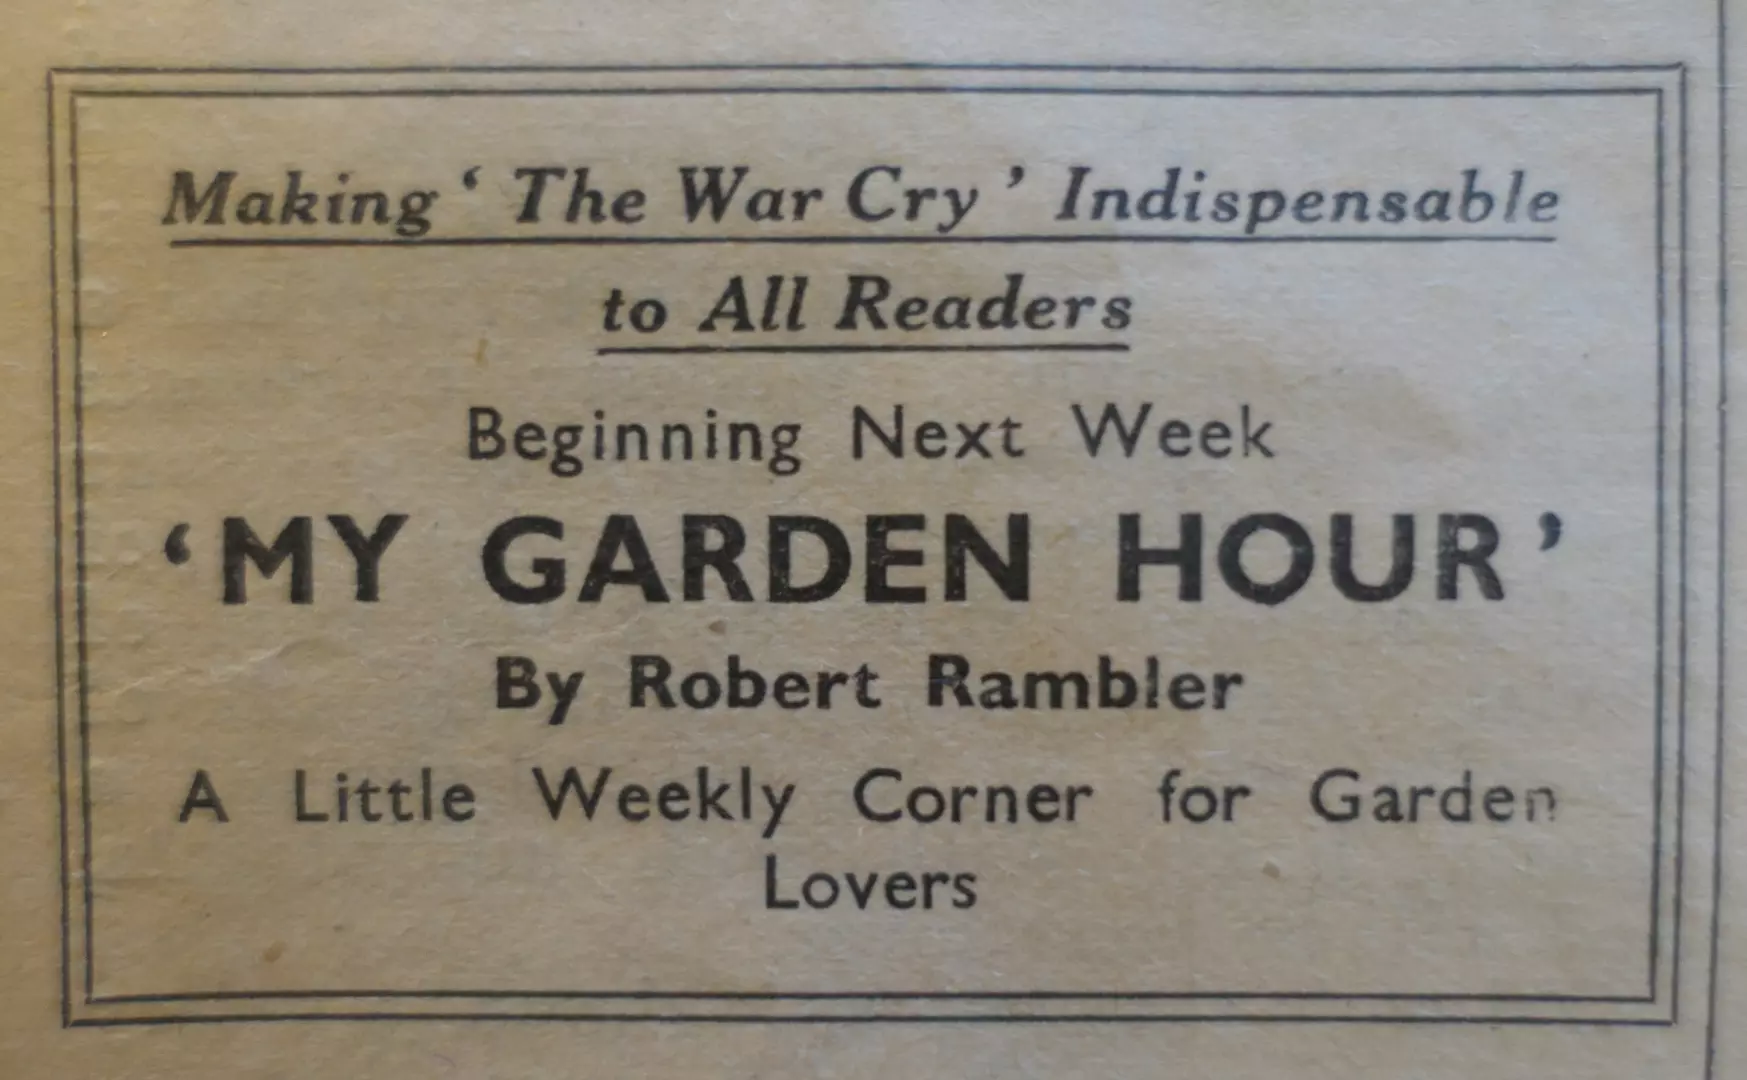  ‘My Garden Hour’ advertisement, The War Cry, 13 February 1933.